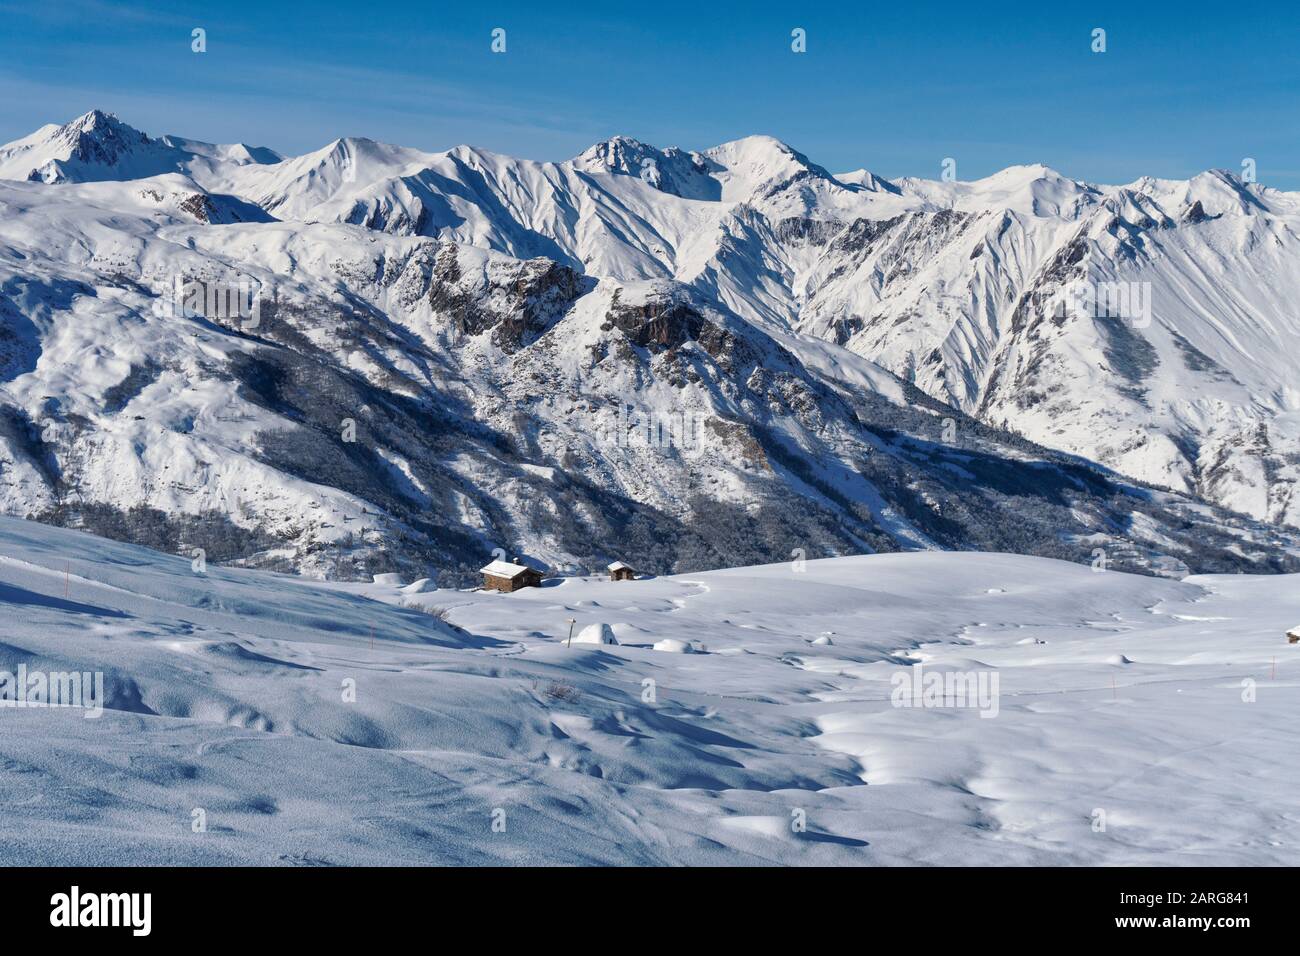 Snow covered barns on the slopes above the French ski resort of St Martin de Belleville in the 3 valleys Stock Photo